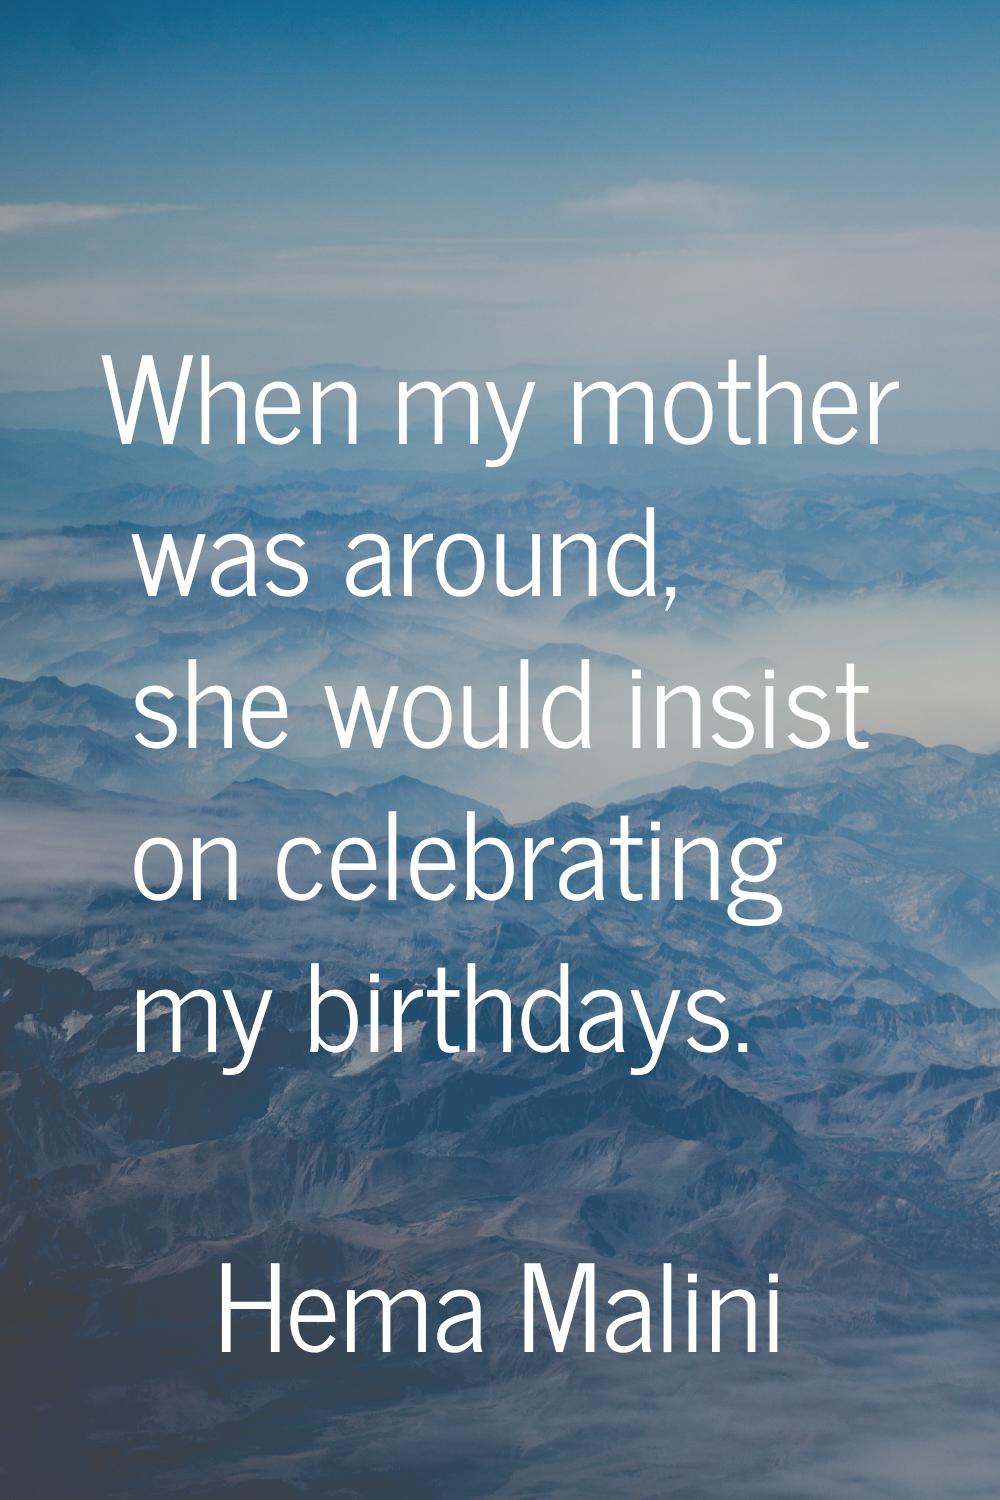 When my mother was around, she would insist on celebrating my birthdays.